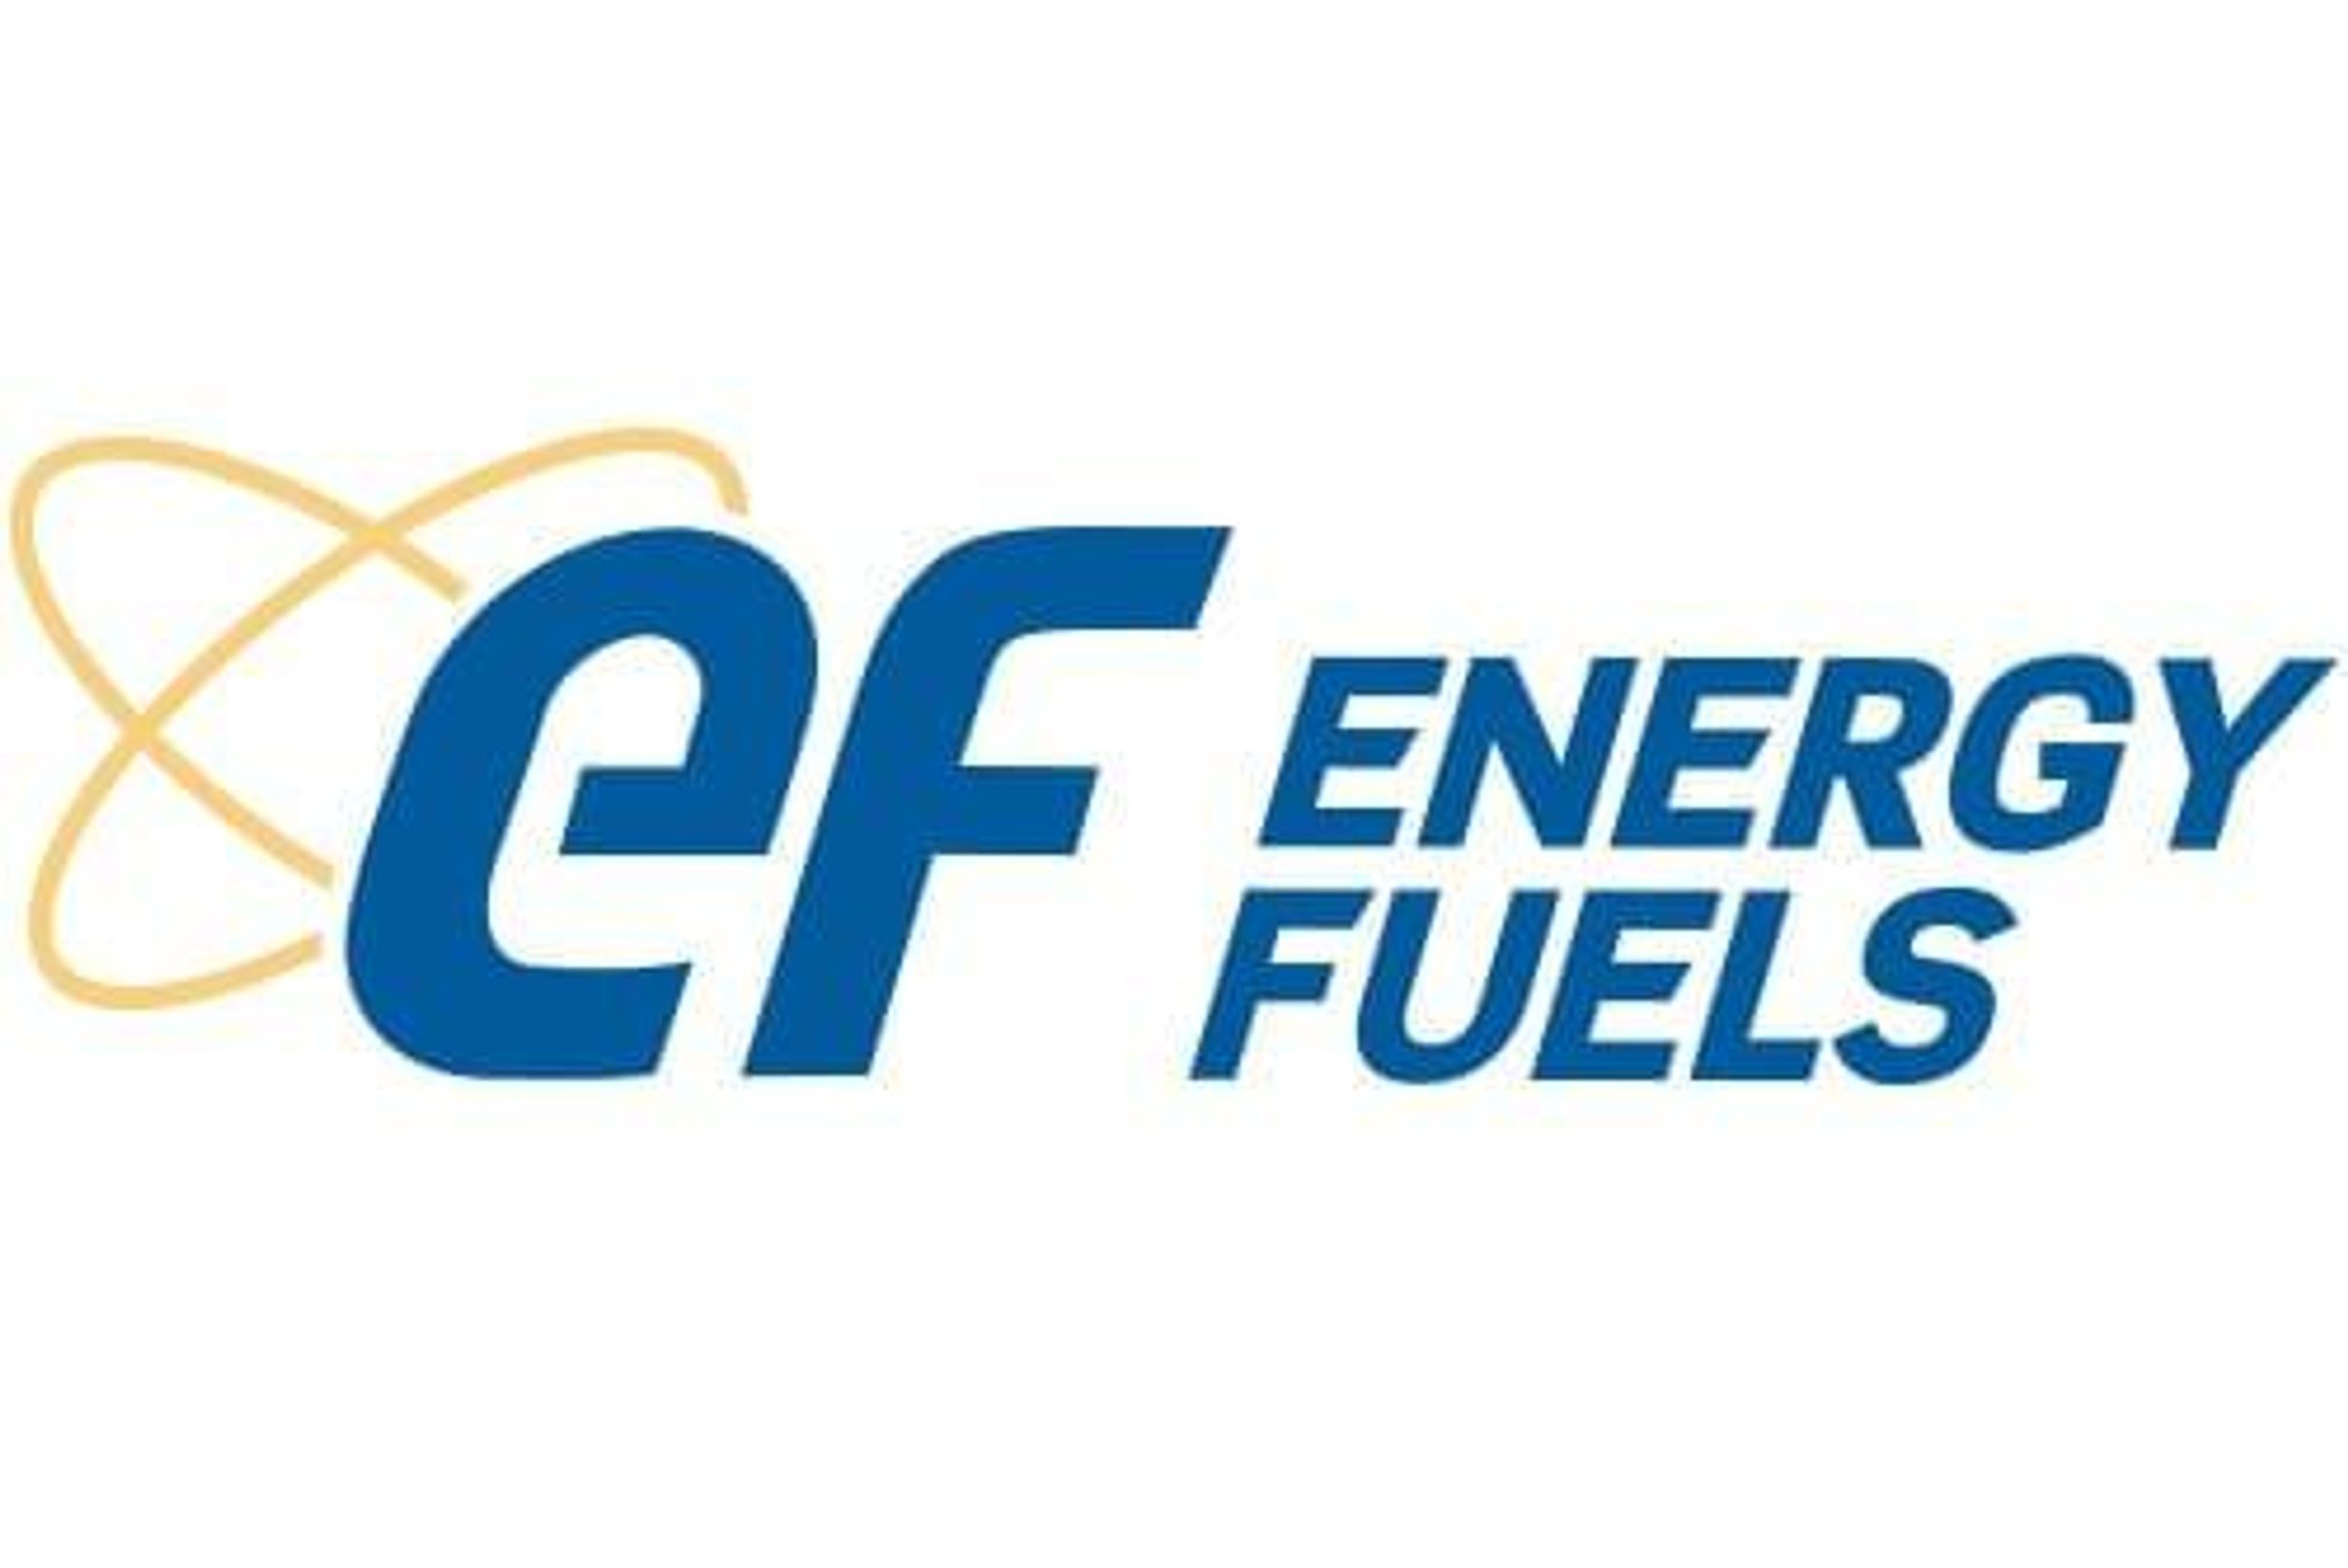 Energy Fuels Announces 2021 Results, Including Net Profits, Strong Cash Position, and Market-Leading U.S. Uranium, Rare Earth and Vanadium Position